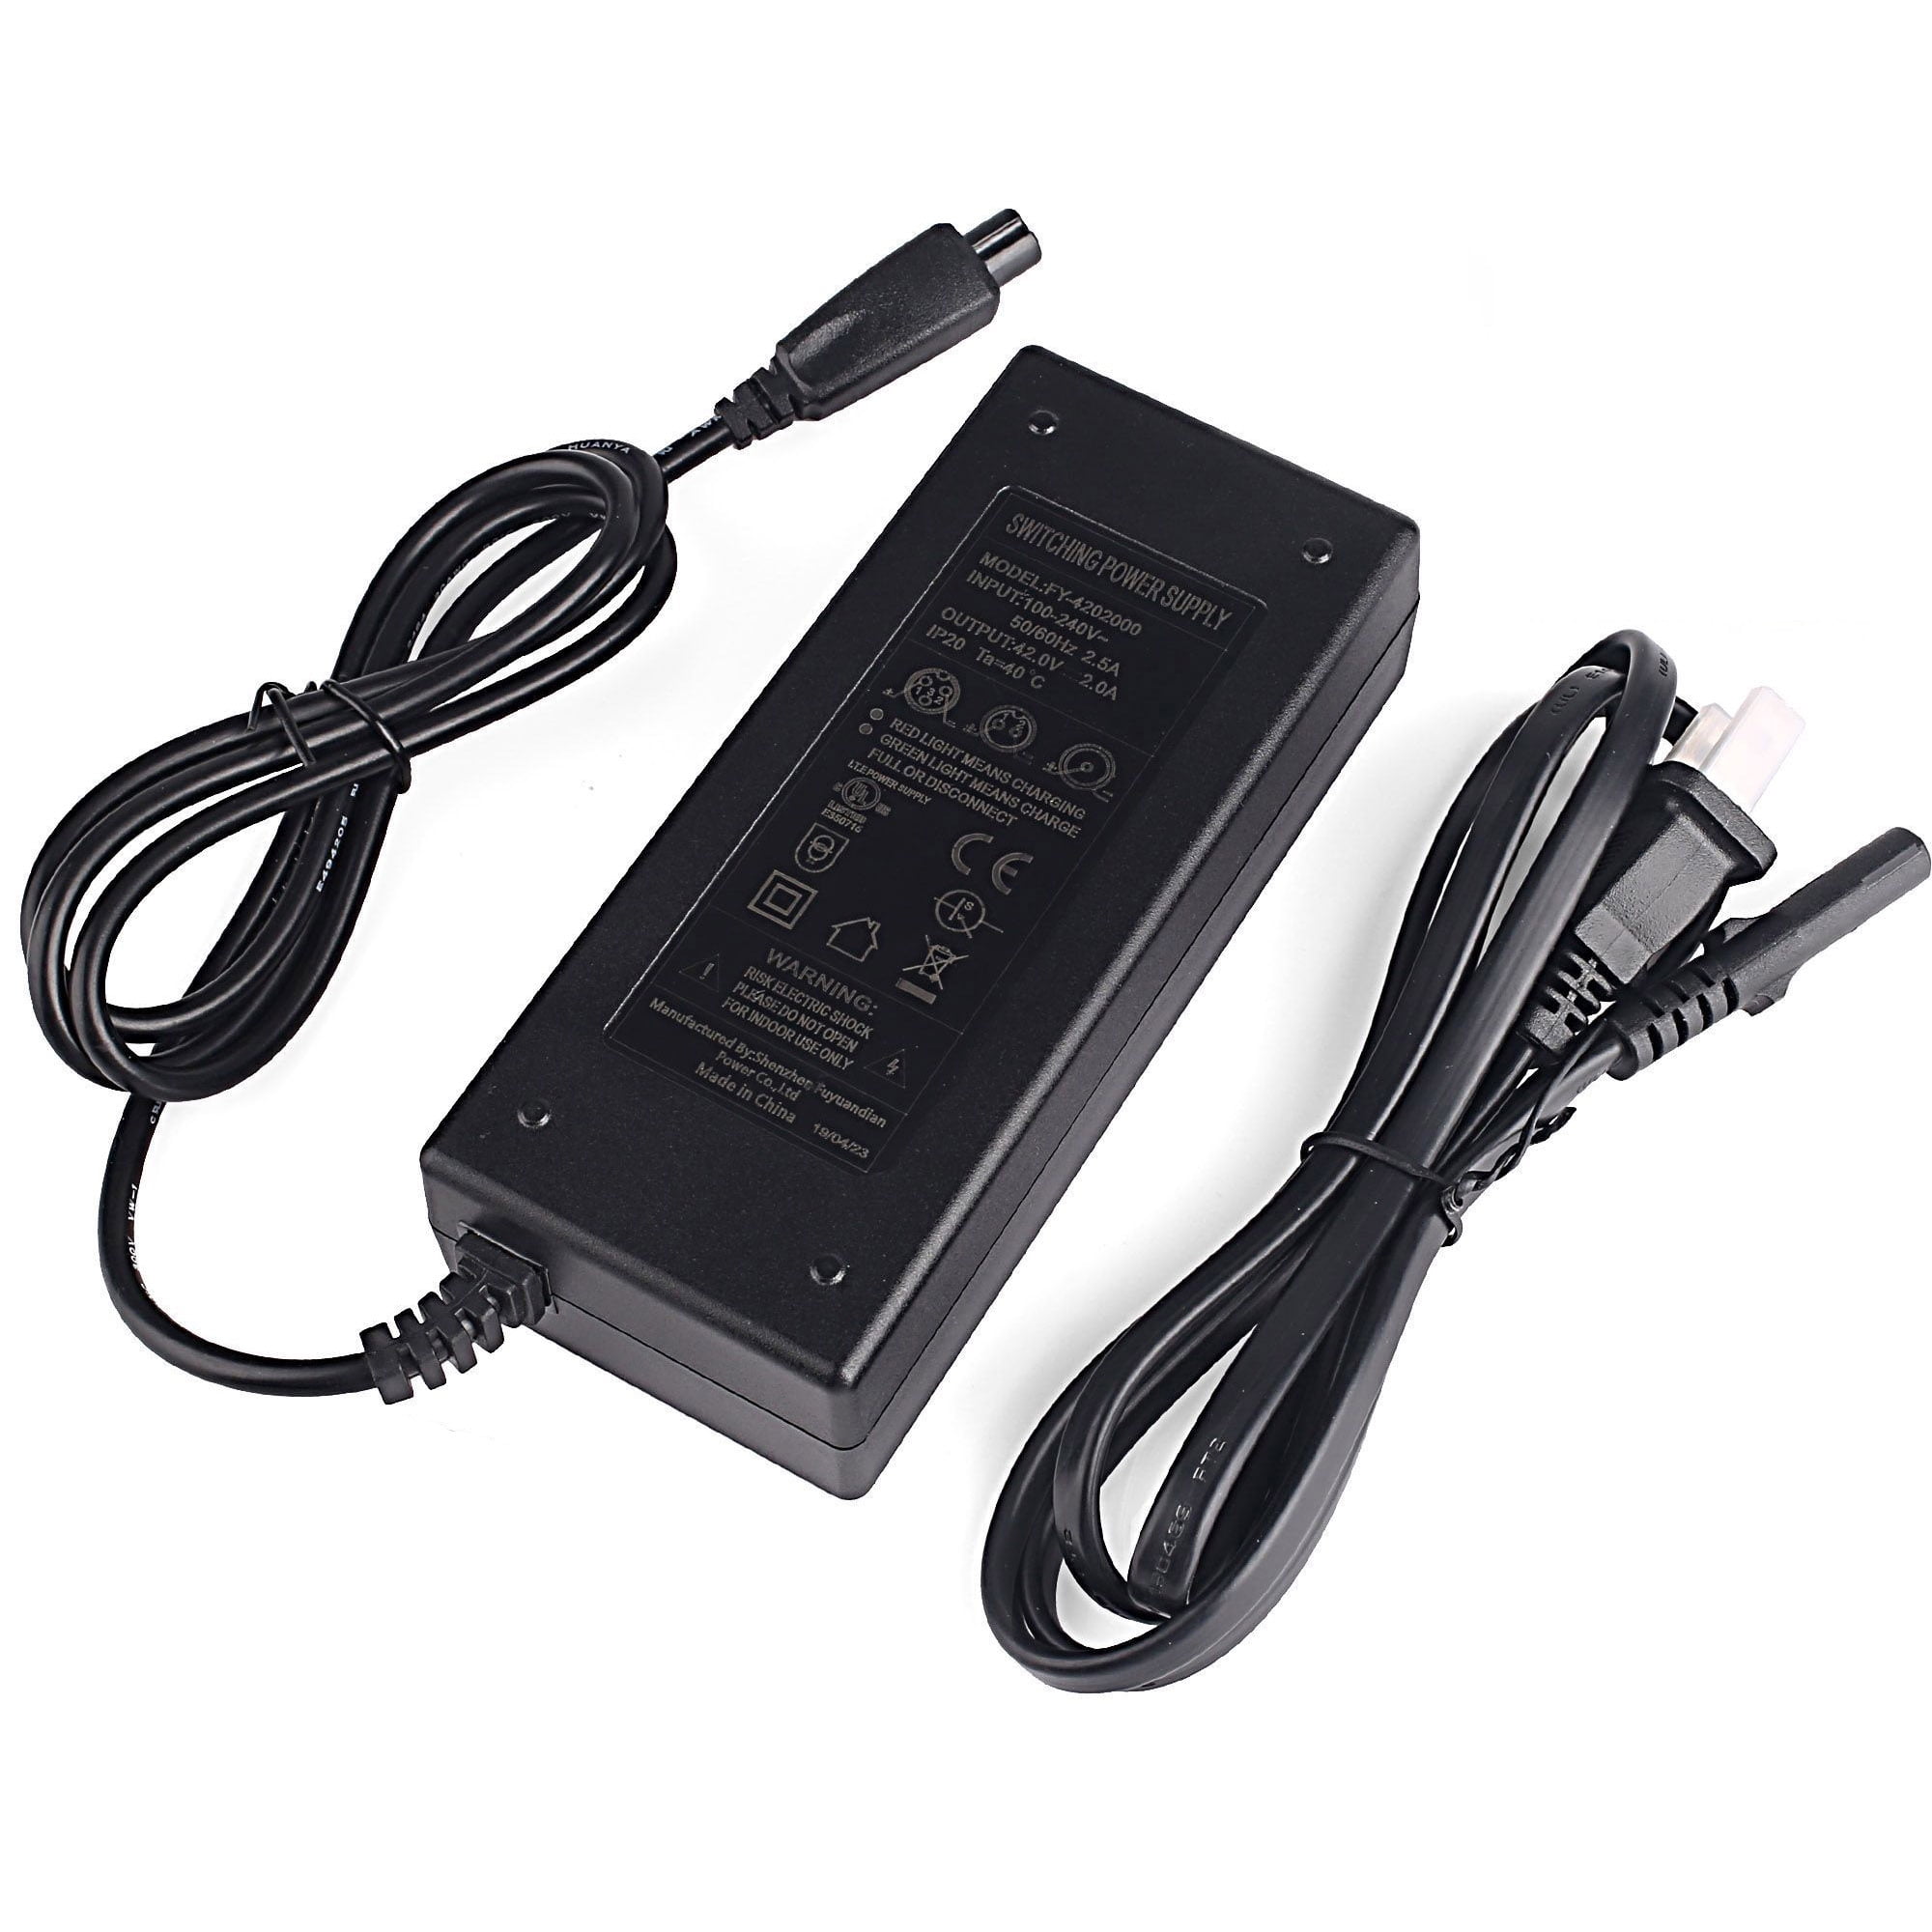 42V 2A Adapter Charger For Balancing Electric Scooter SWAGTRON T580 T1 T5 T6 T8 